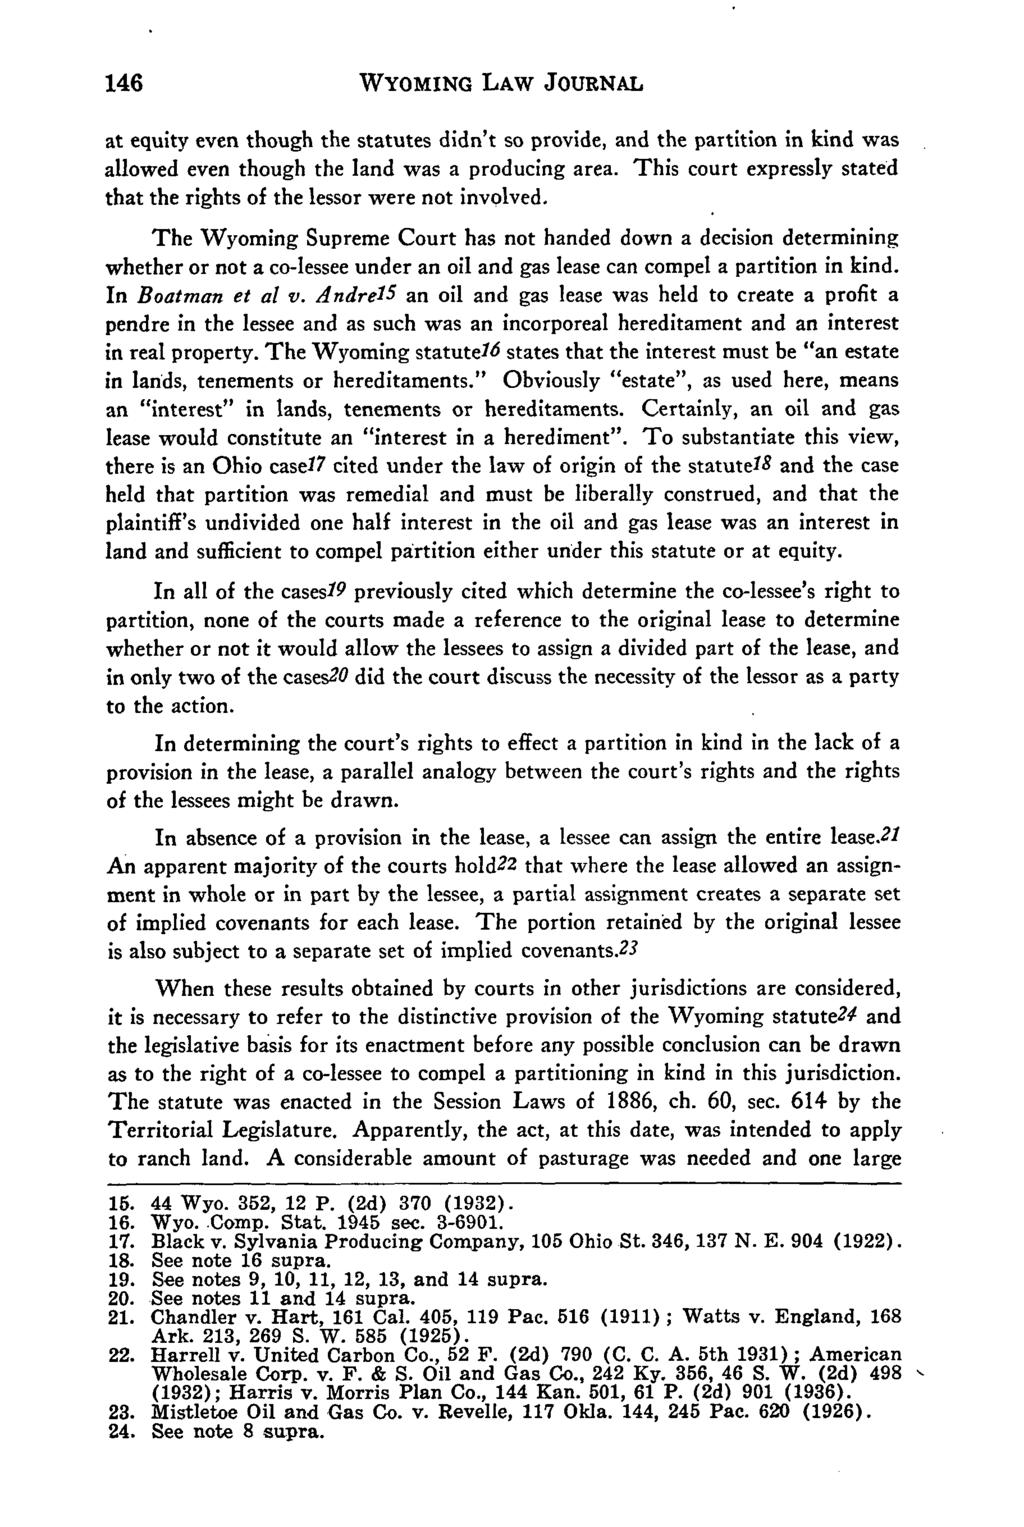 WYOMING LAW JOURNAL at equity even though the statutes didn't so provide, and the partition in kind was allowed even though the land was a producing area.